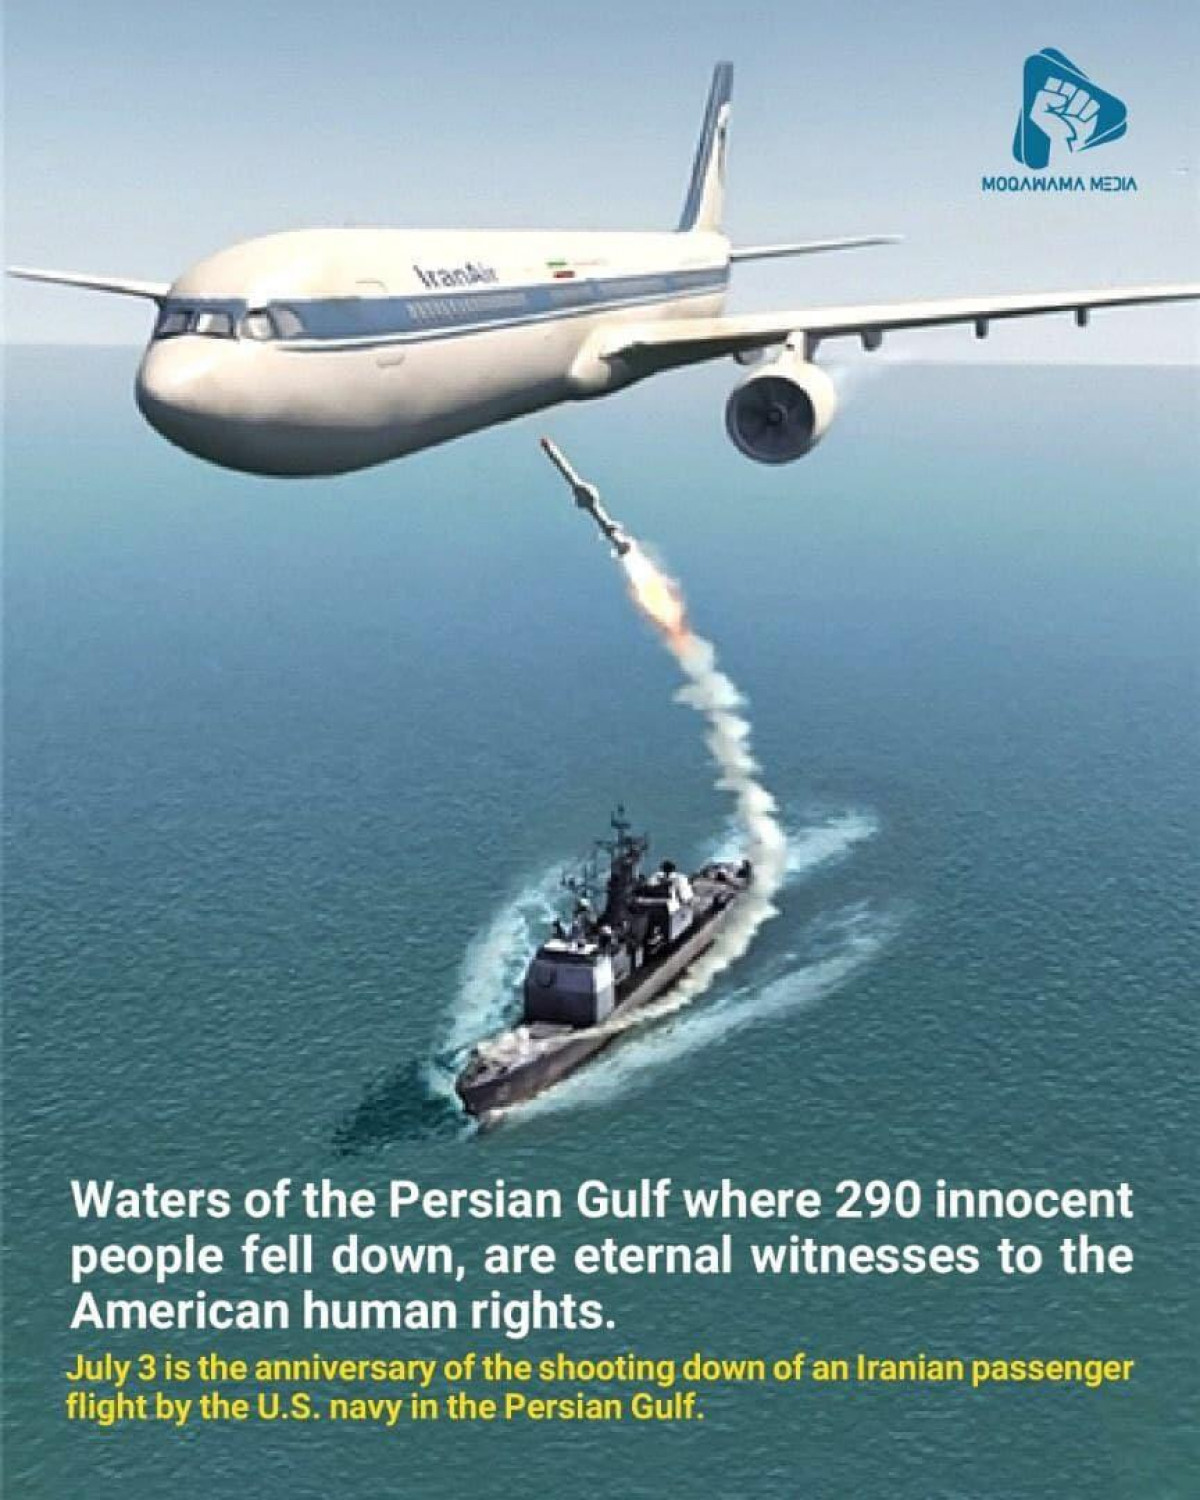 Waters of the Persian Gulf where 290 innocent people fell down, are eternal winesses to the American human rights